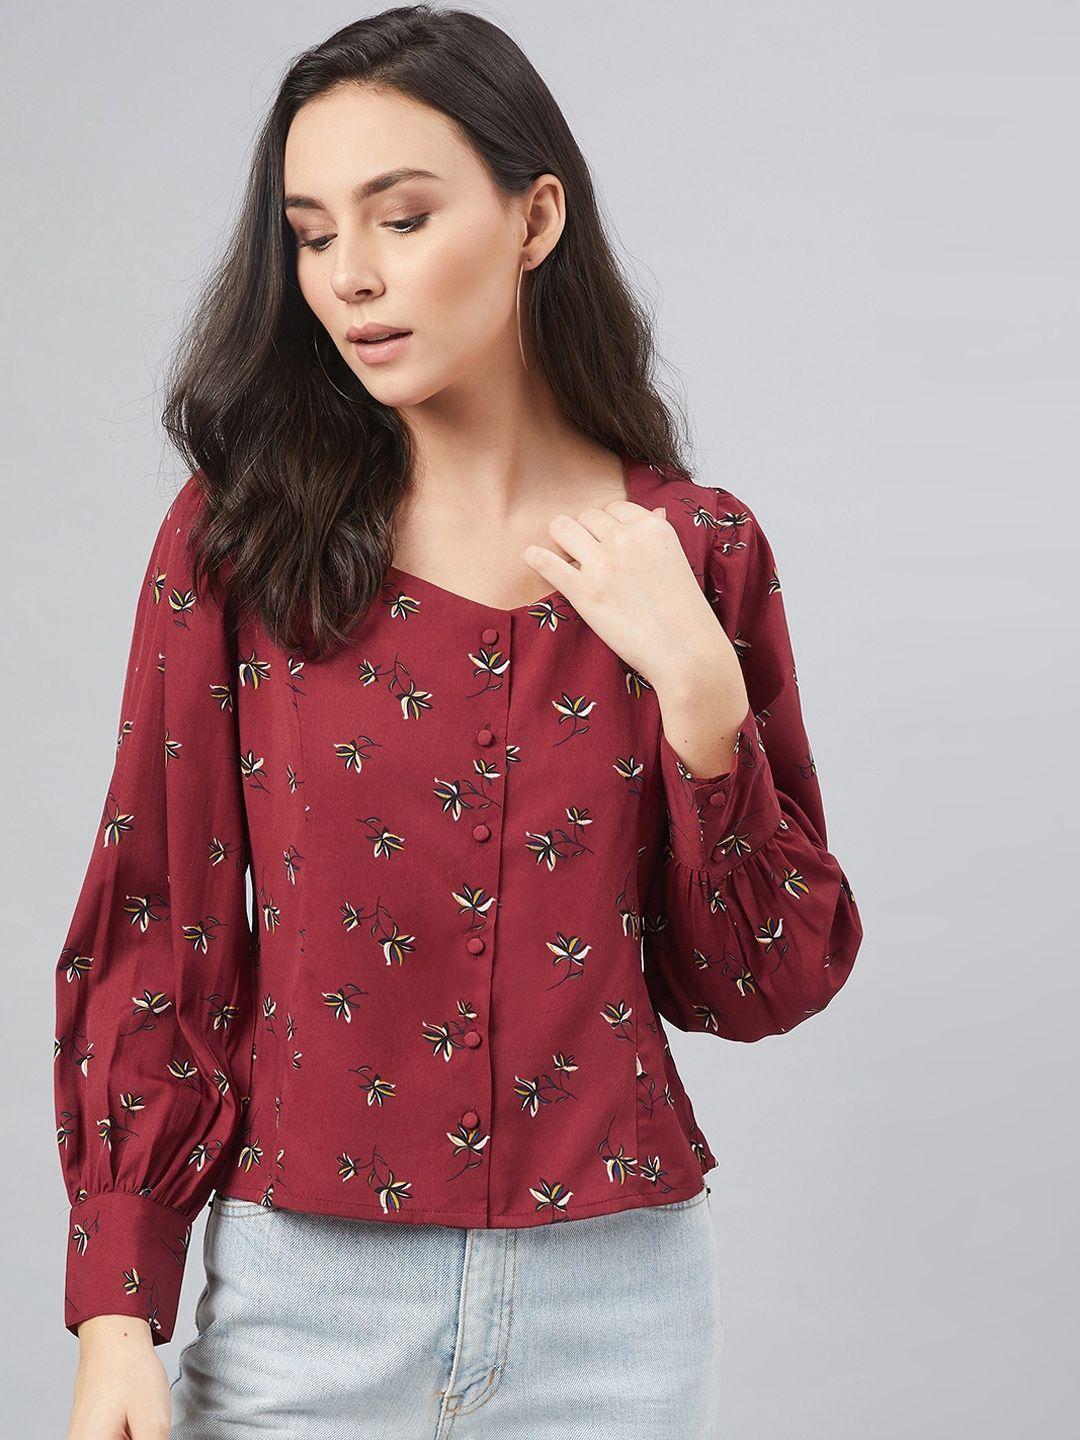 rare maroon floral top with cuffed sleeves